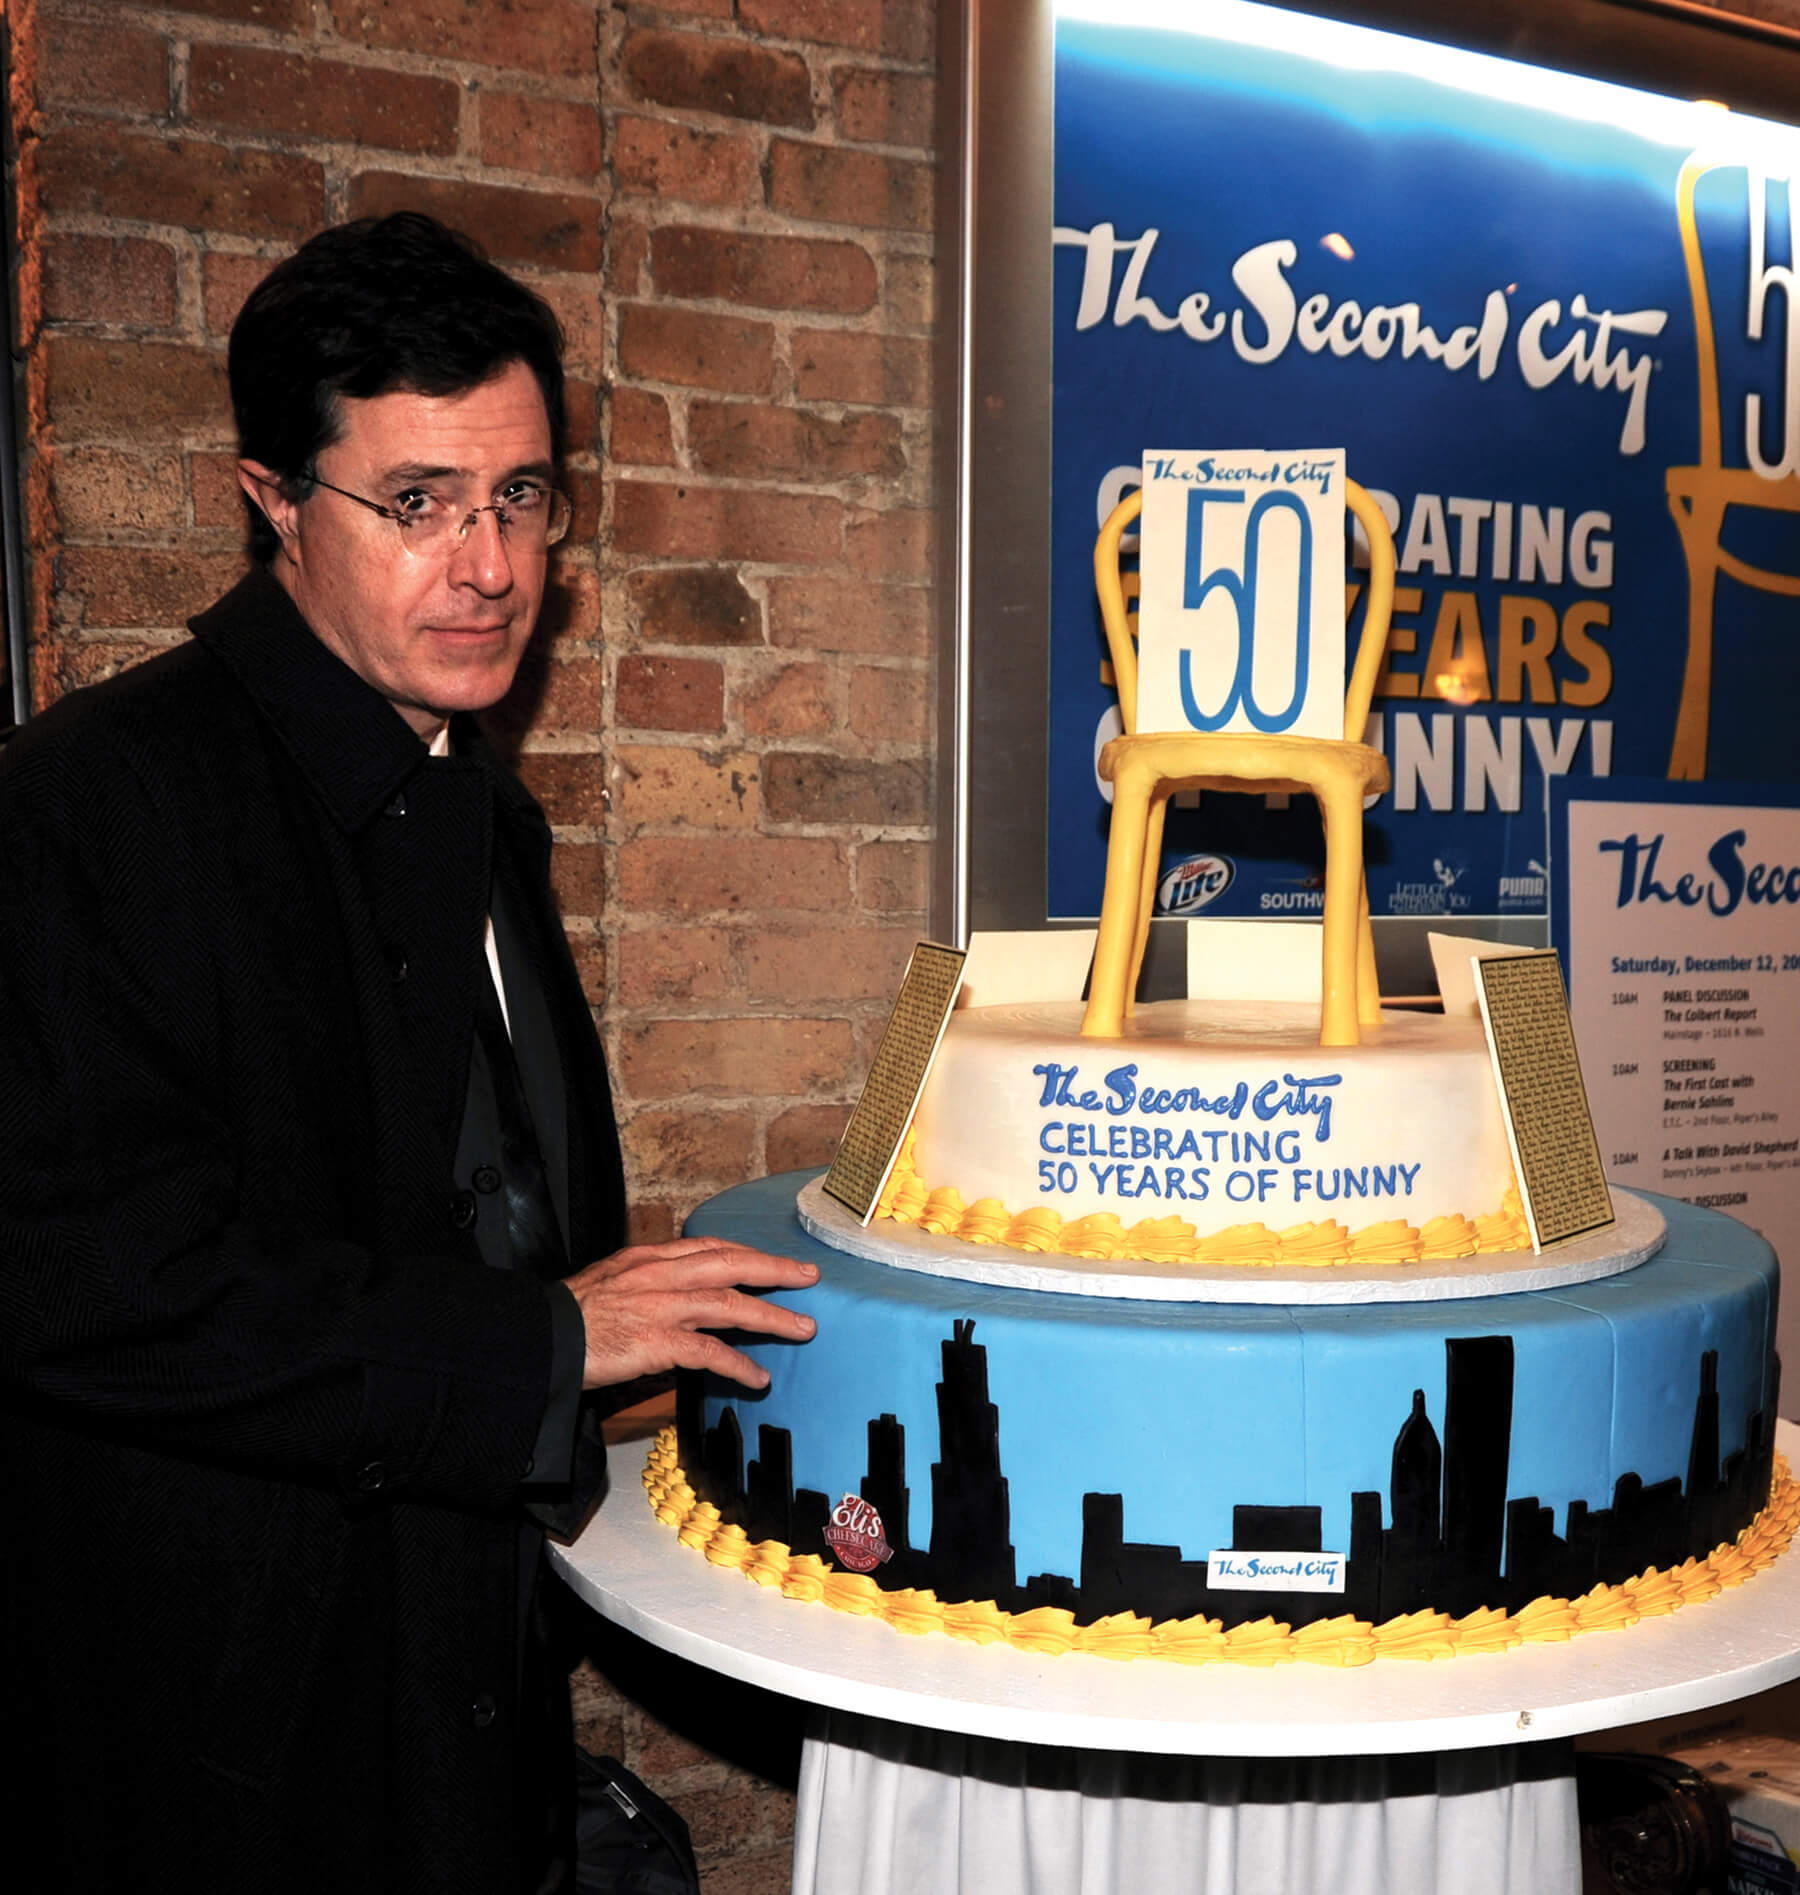 Stephen Colbert at the Second City 50th anniversary